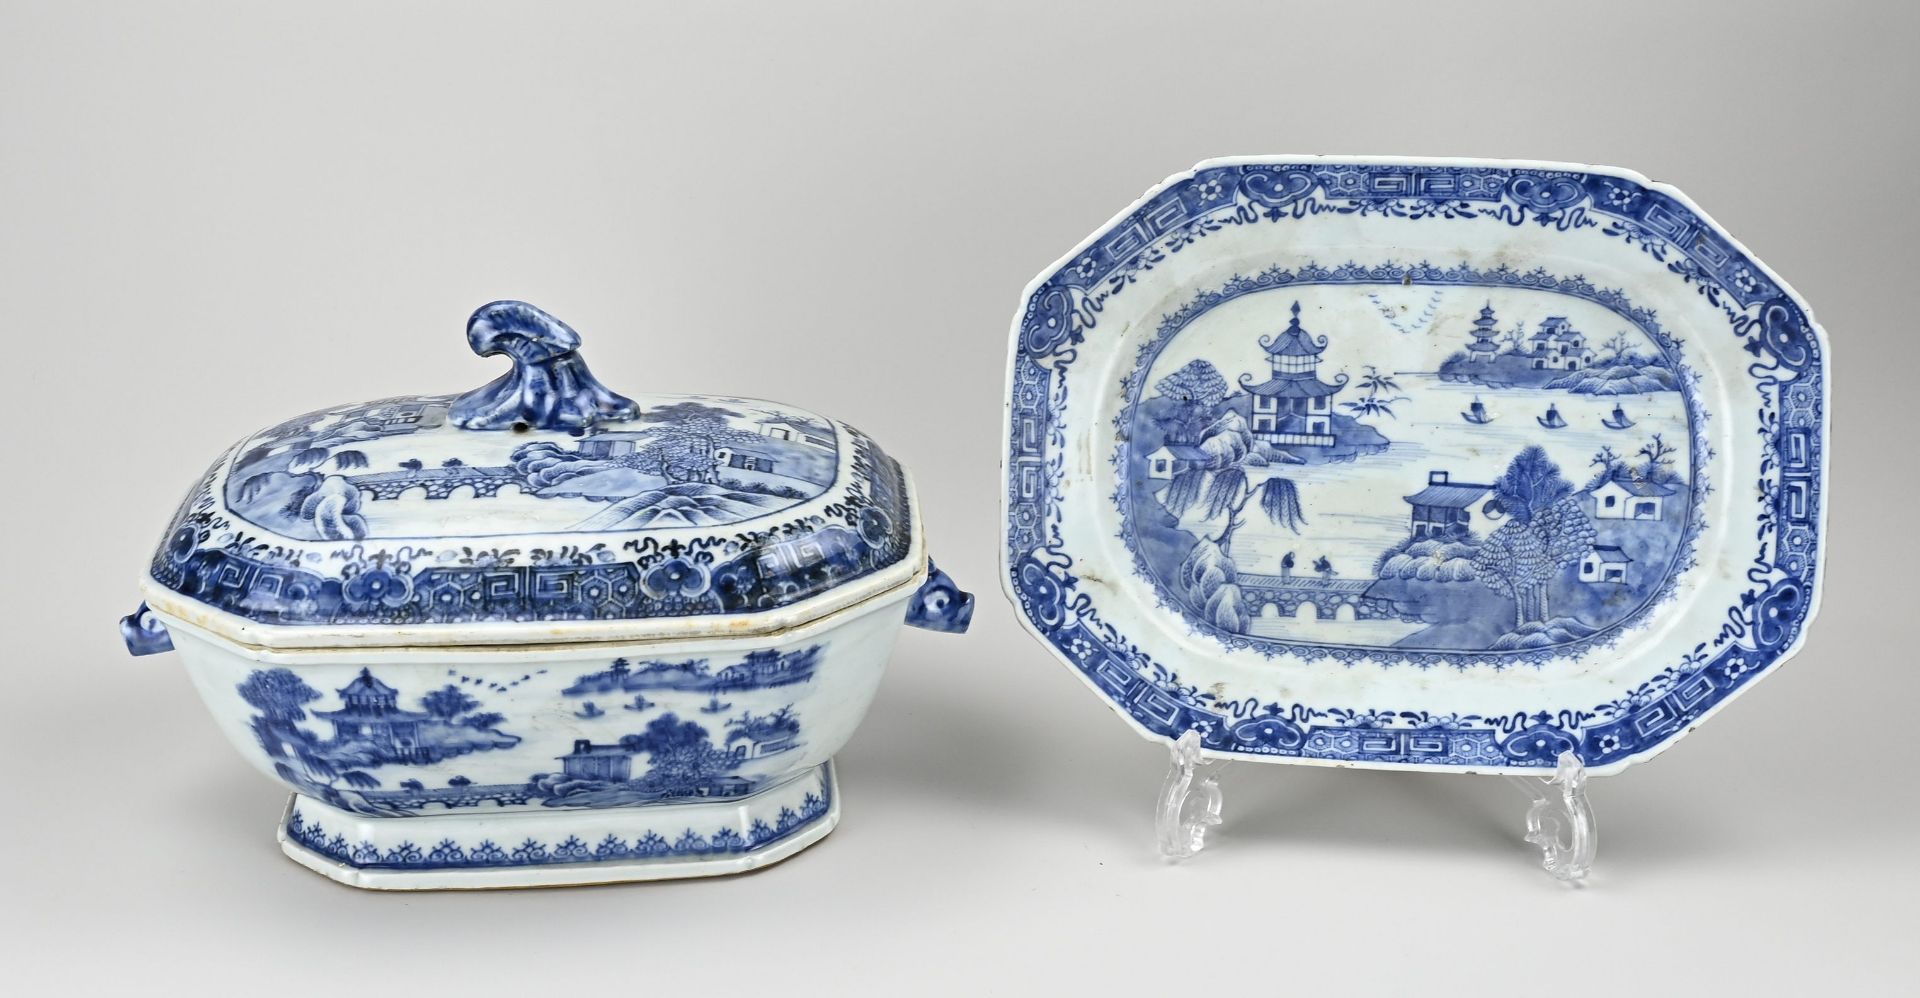 18th century Chinese lidded tureen + saucer - Image 3 of 3